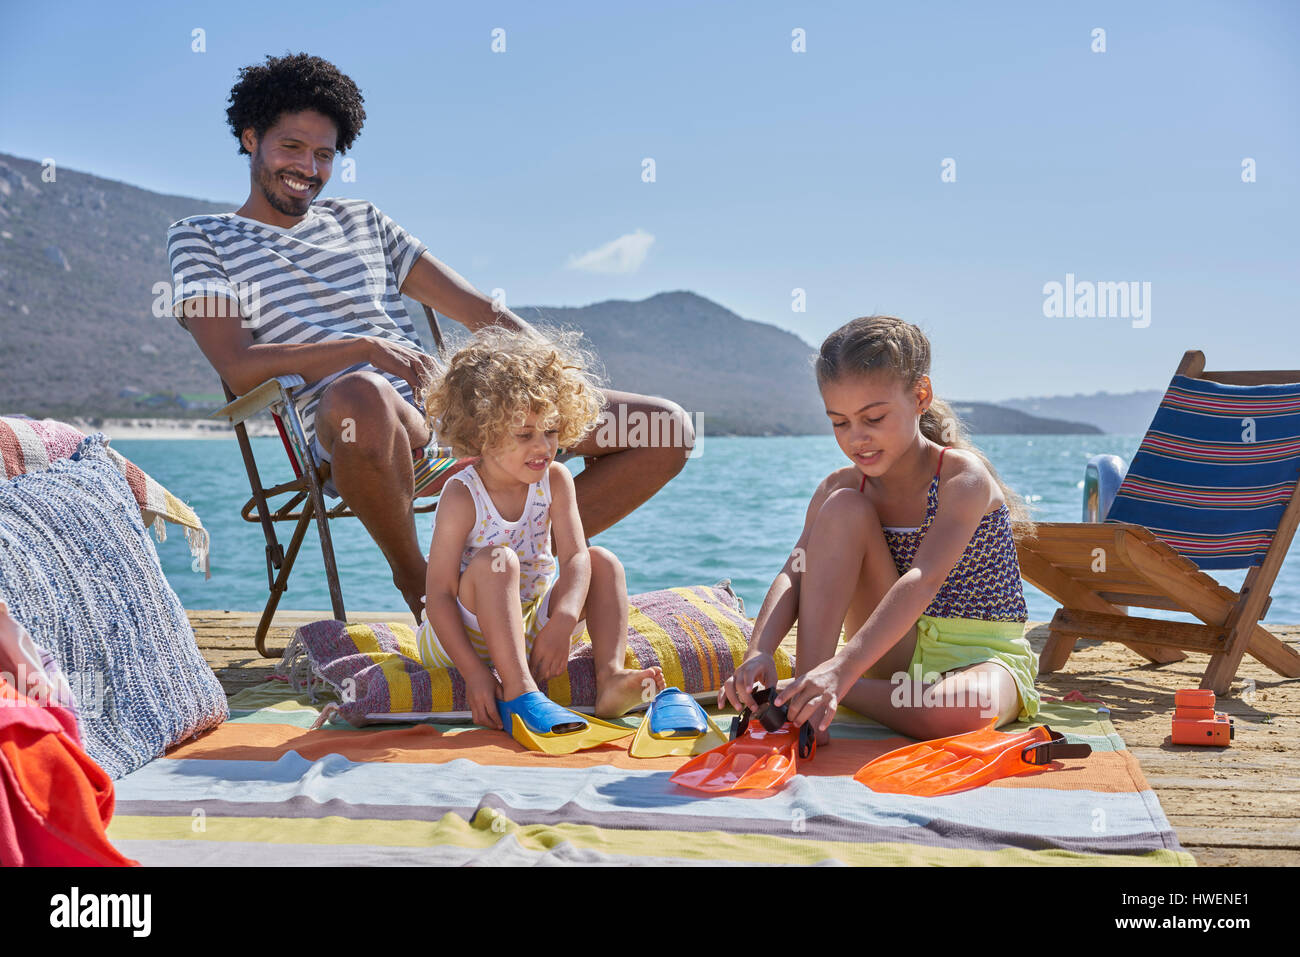 Family on houseboat deck, Kraalbaai, South Africa Stock Photo